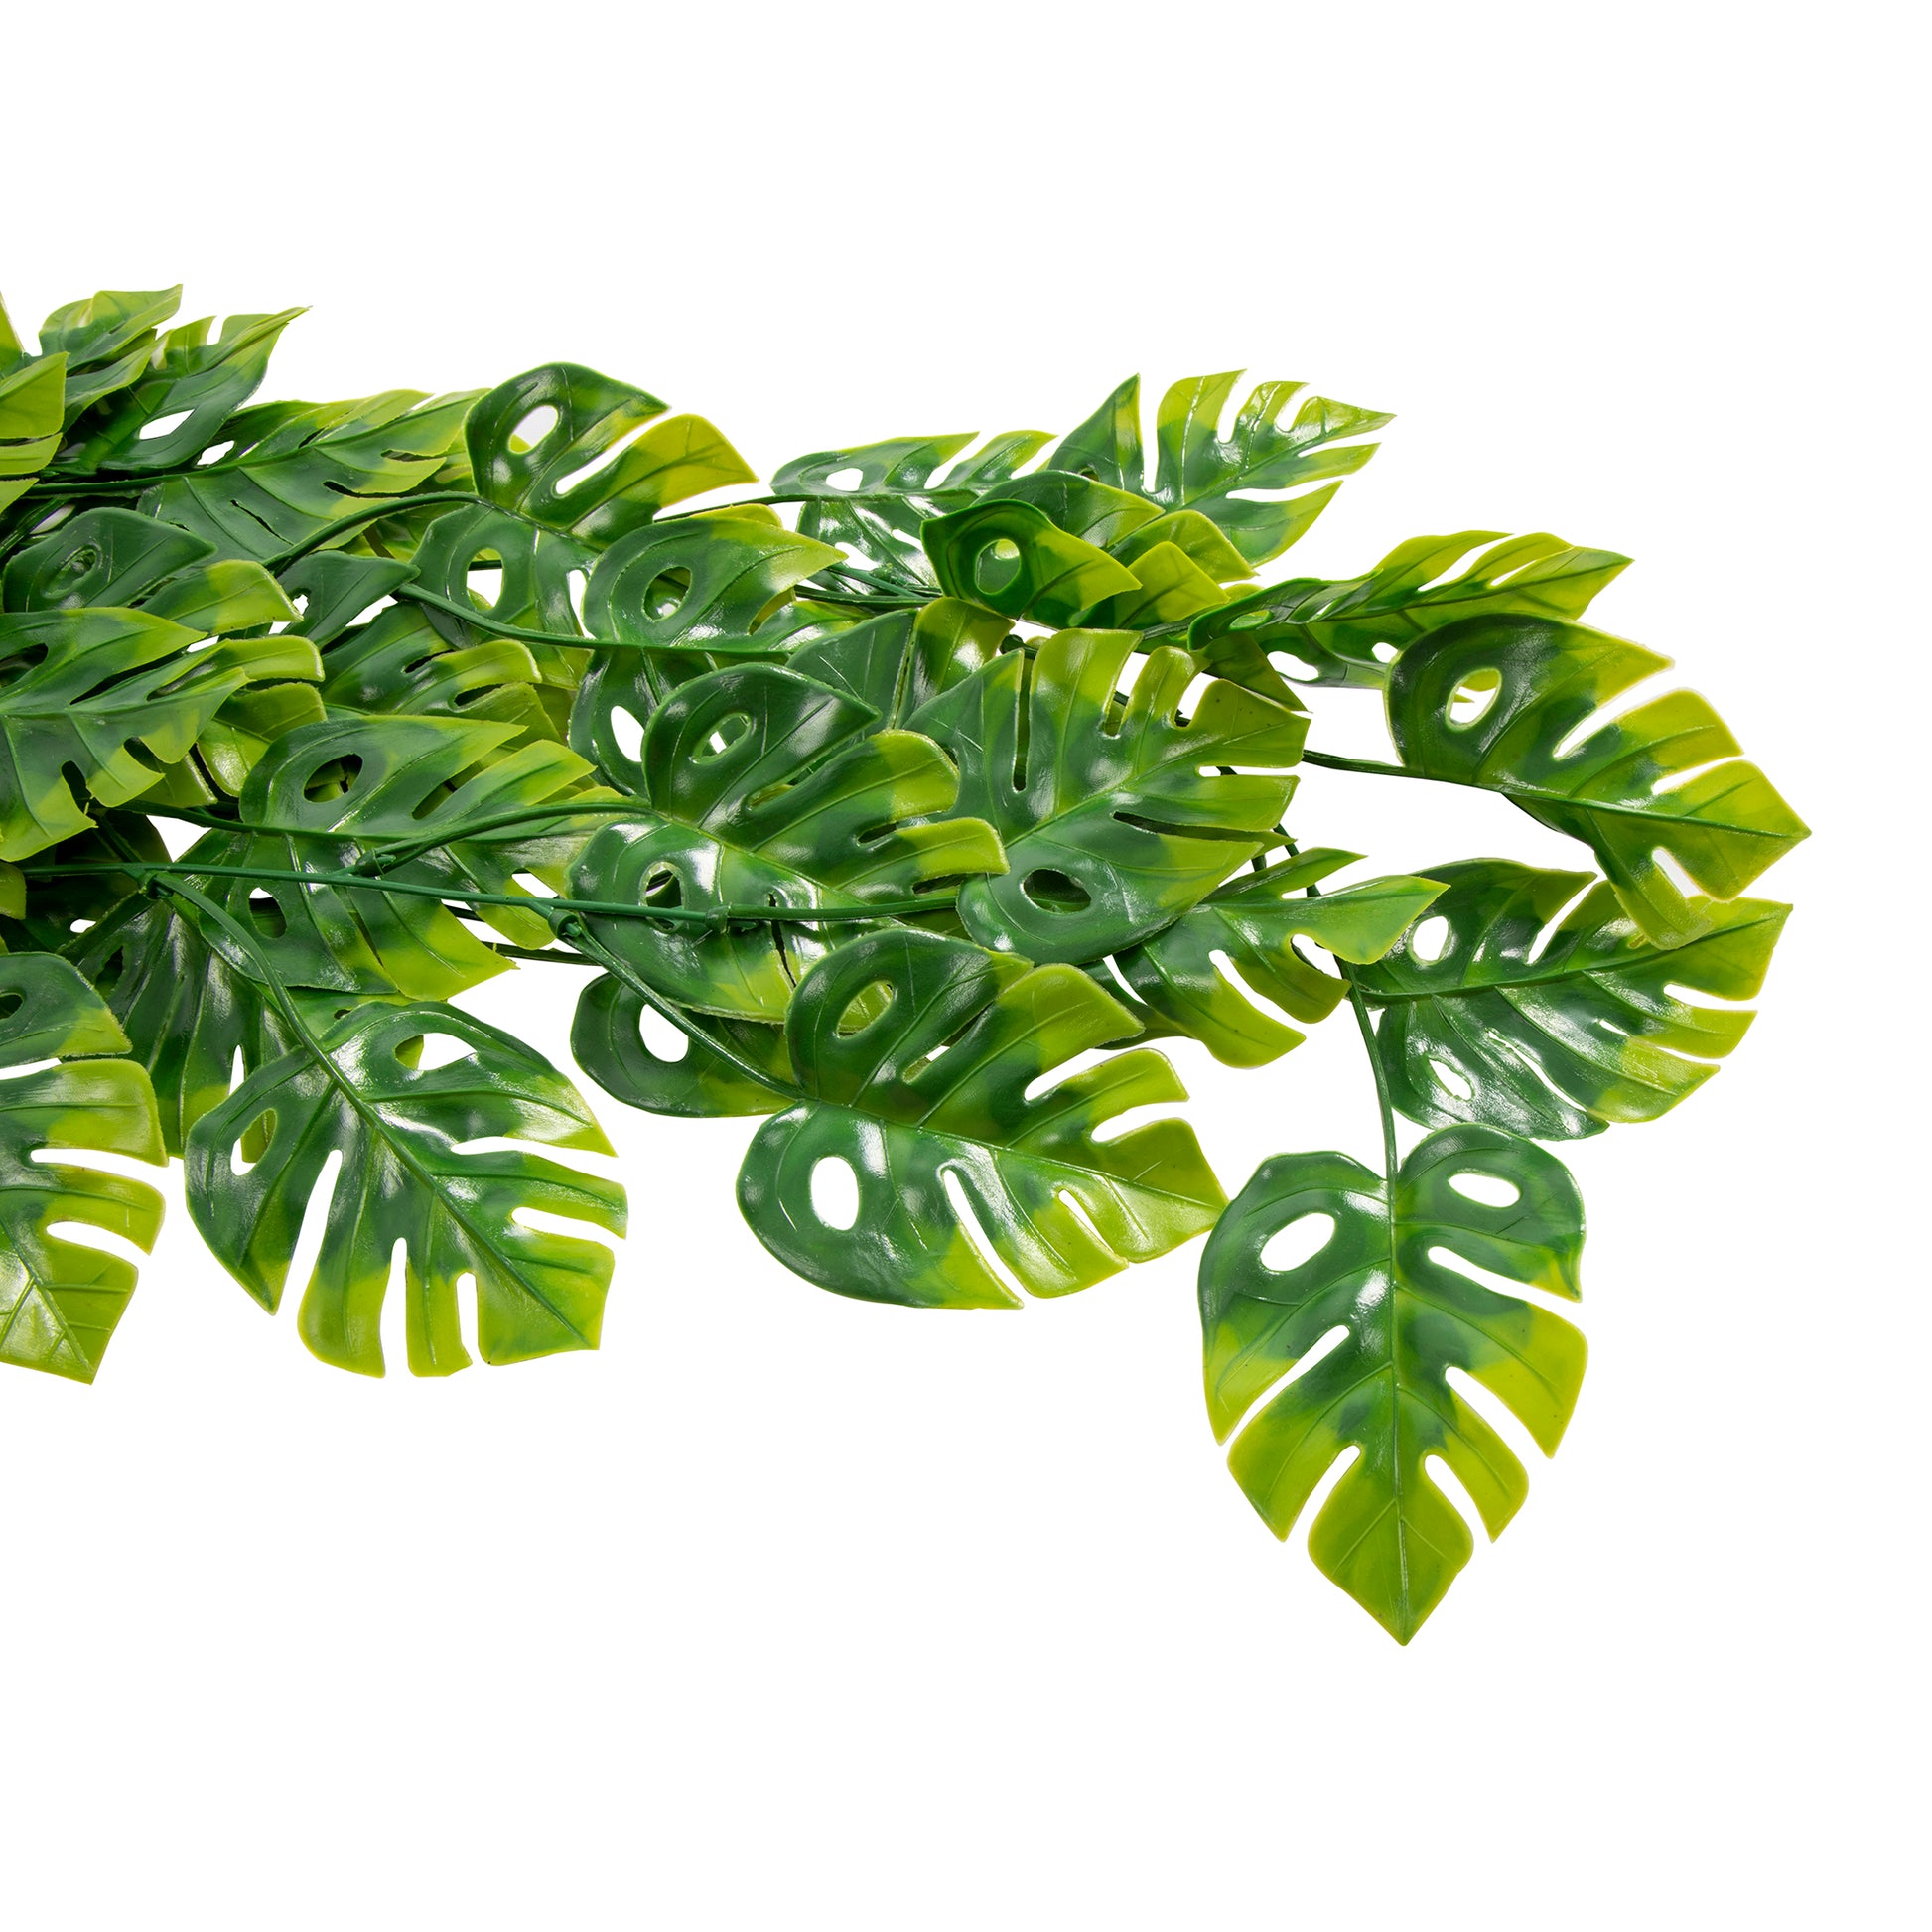 2 Bushes Tropical Palm Small Monstera Artificial Leaves Hanging Vine